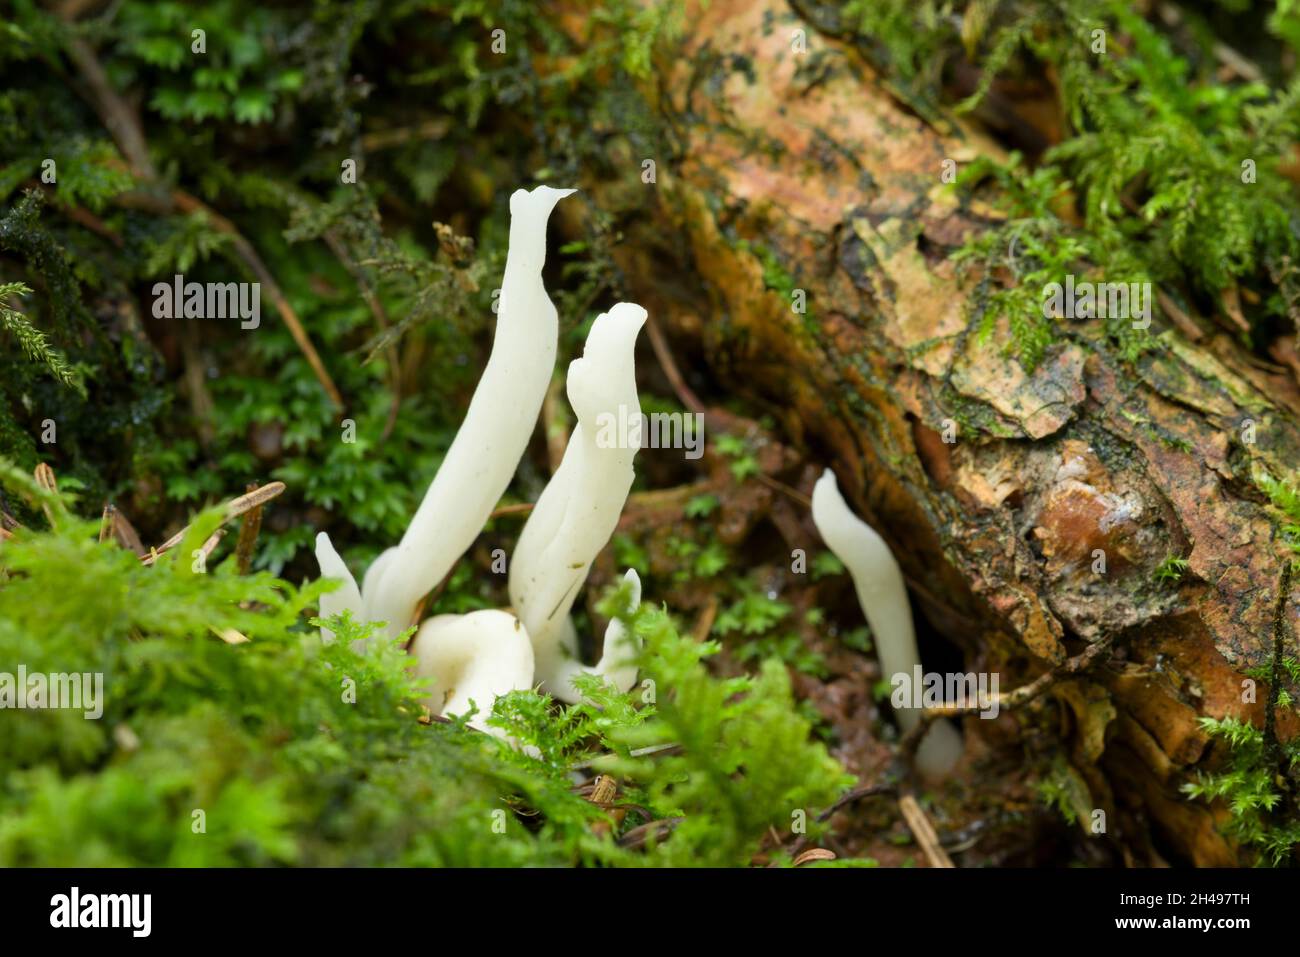 Wrinkled Club Fungus (Clavulina rugosa), or Wrinkled Coral Fungus, on the floor of a coniferous woodland the Mendip Hills Somerset, England. Stock Photo